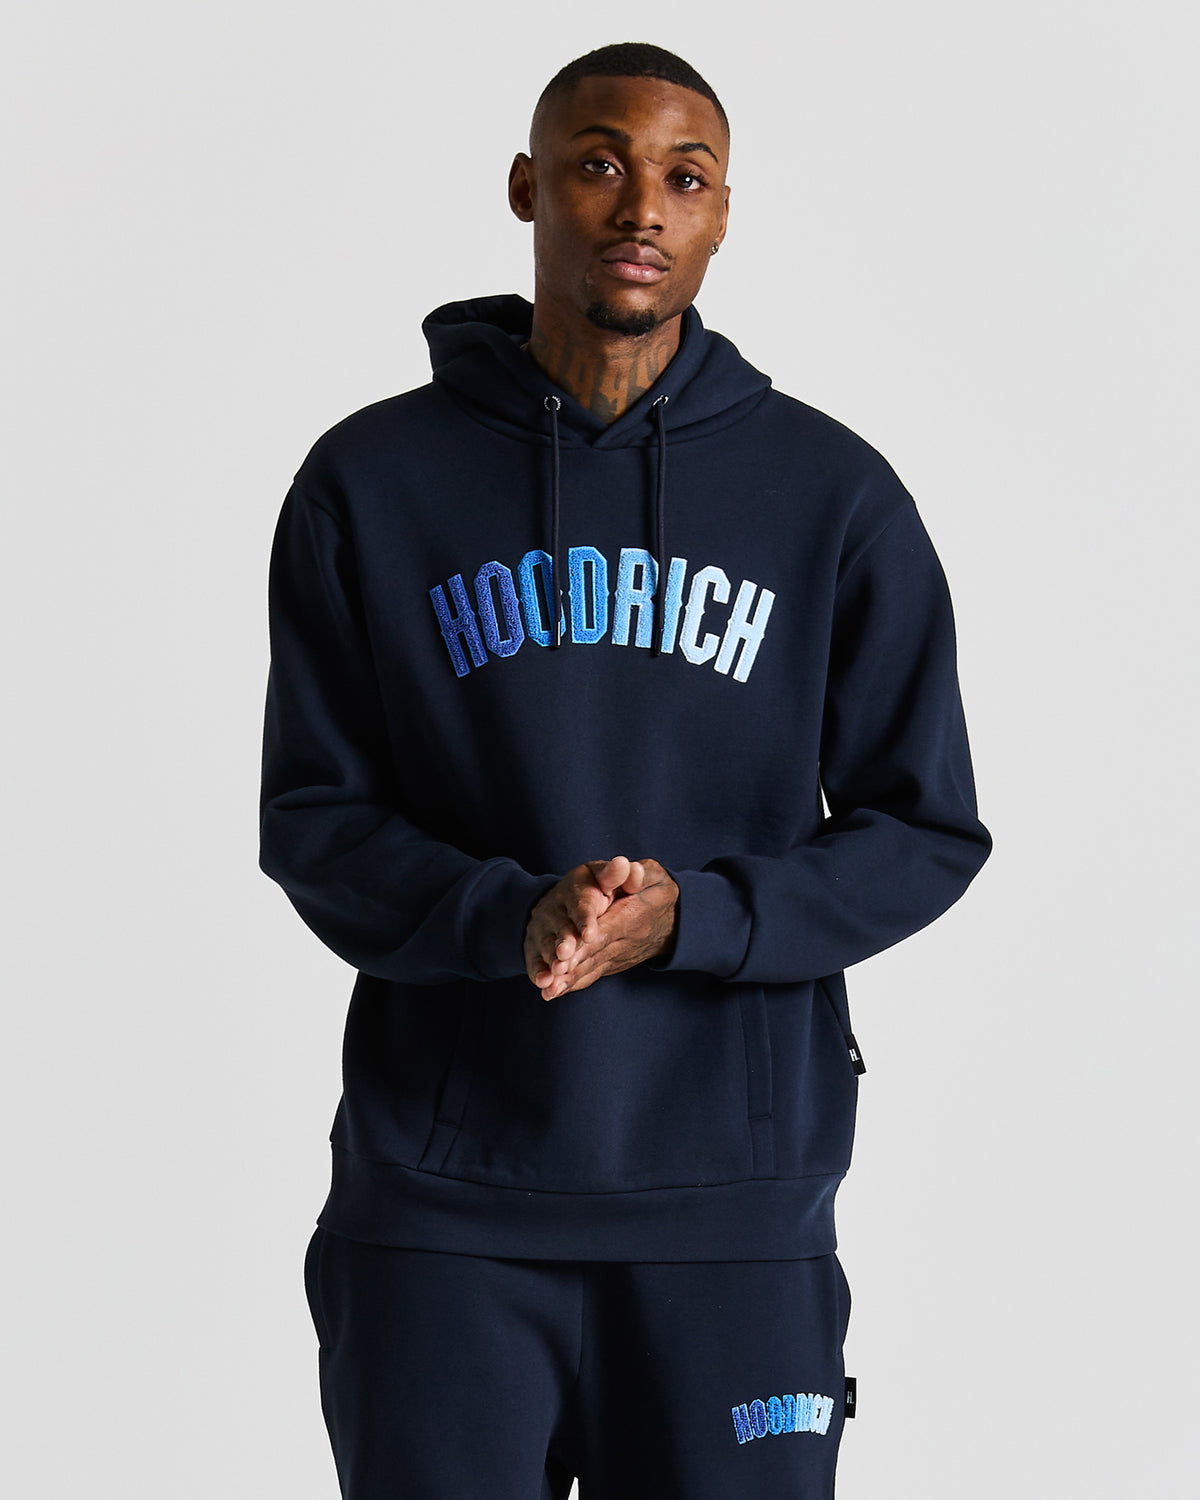 2023 Winter Sports Hoodie For Men Hoodrich Tracksuit Letter Towel  Embroidered Winter Sweatshirt Hoodie For Men Colorful Blue Solid Sweater  Set dz